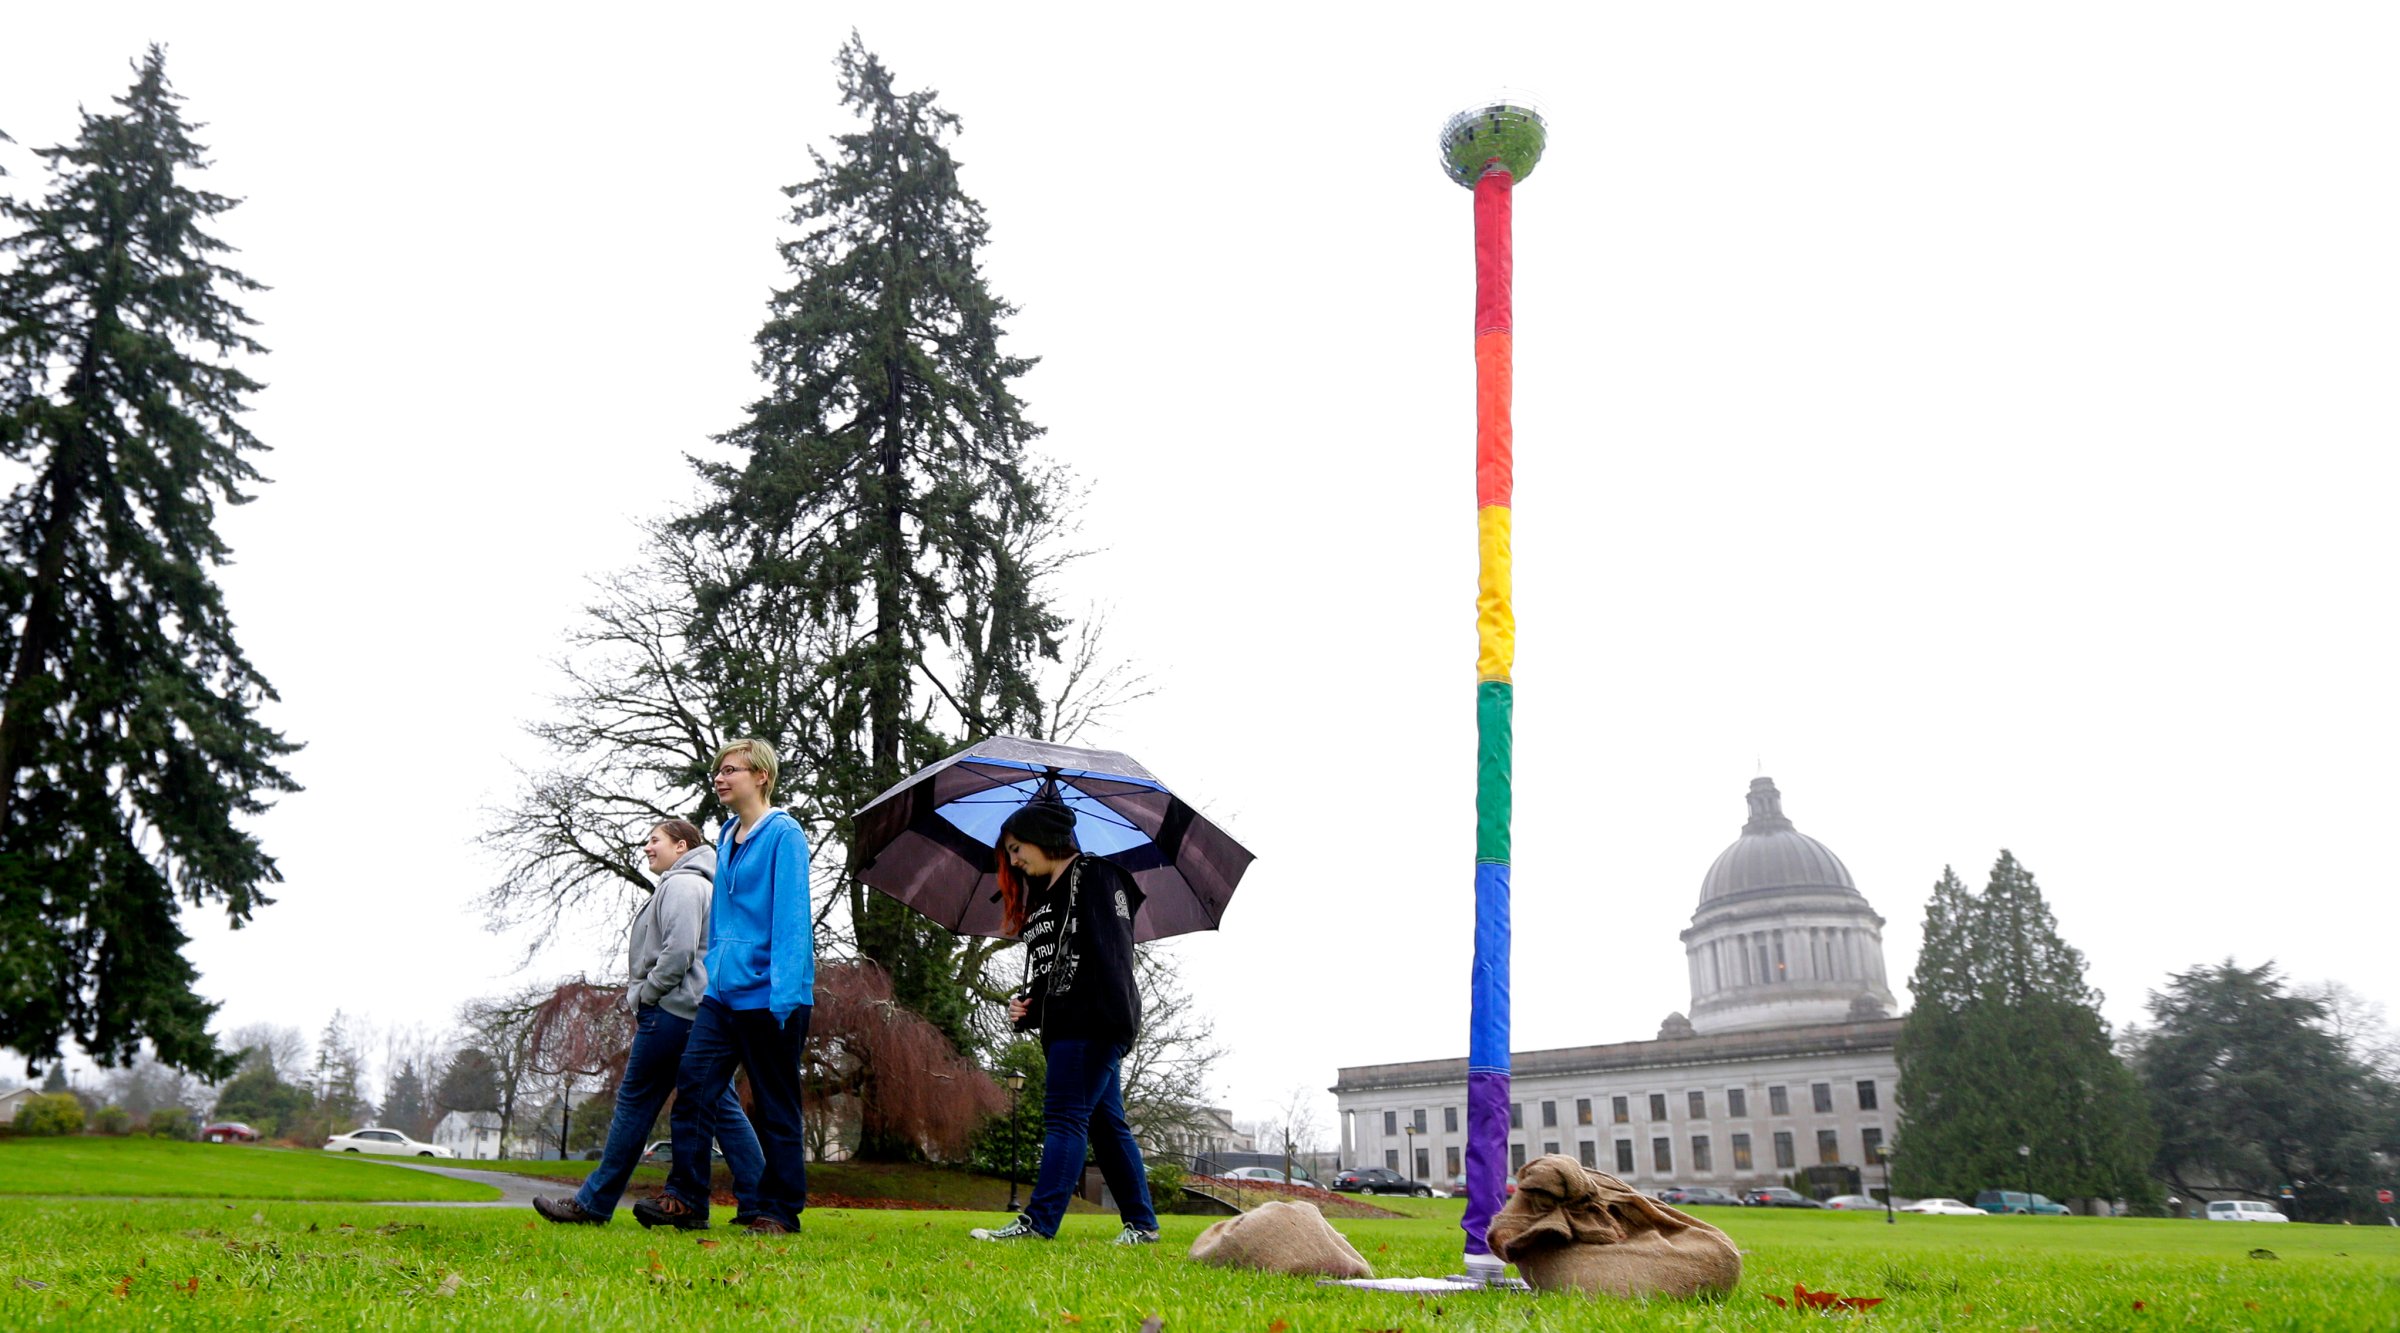 From left, siblings Kelli, Caitlynn, and Kerri Ray walk near a "Festivus Pole" supporting gay rights that they helped their father, Robert Ray, put up on Dec. 21, 2015, at the Capitol in Olympia, Wash.